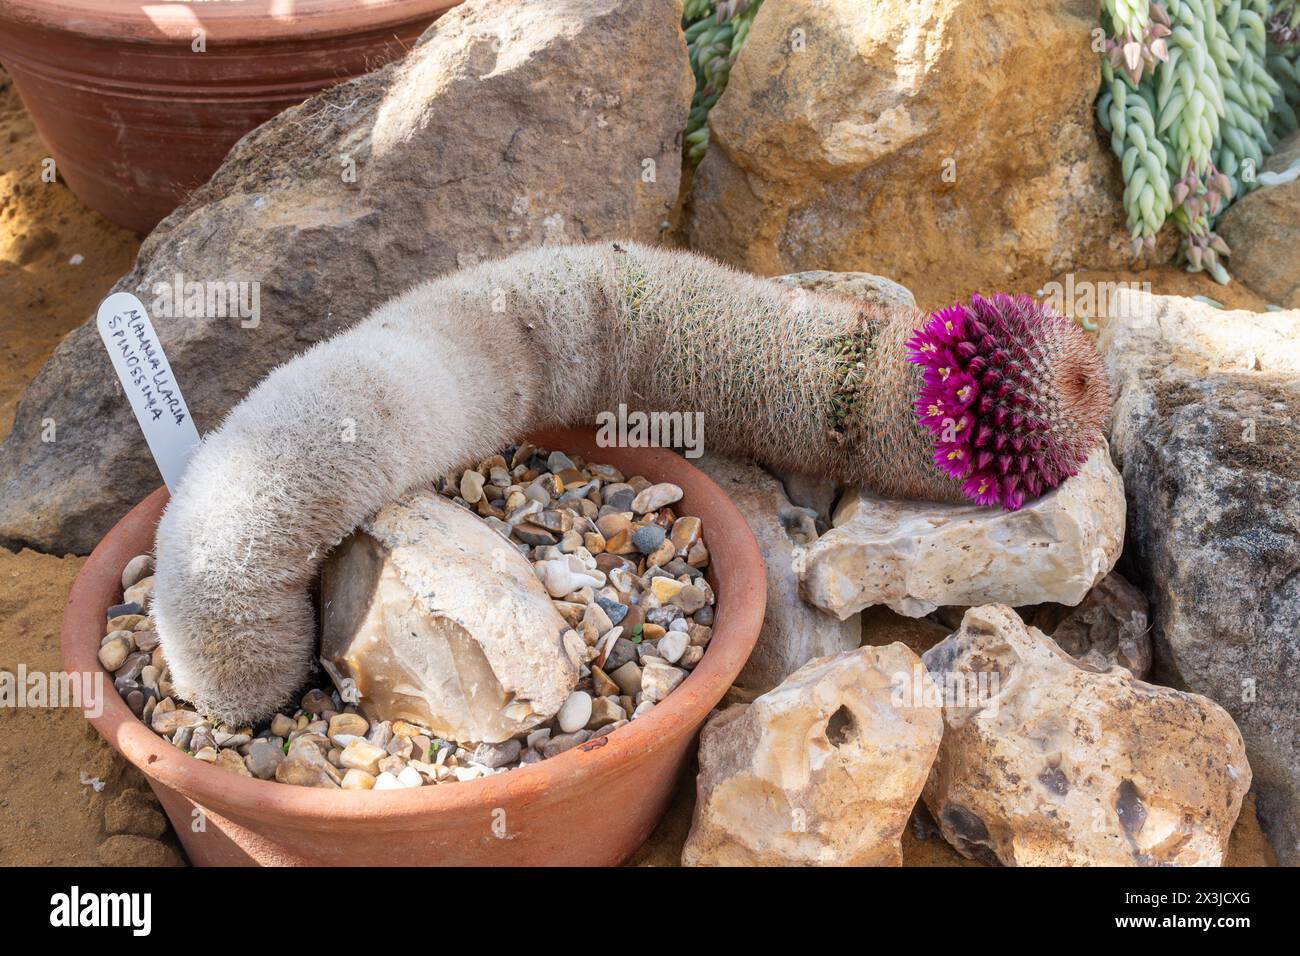 Mammillaria spinosissima, also known as the spiny pincushion cactus, with pink flowers Stock Photo